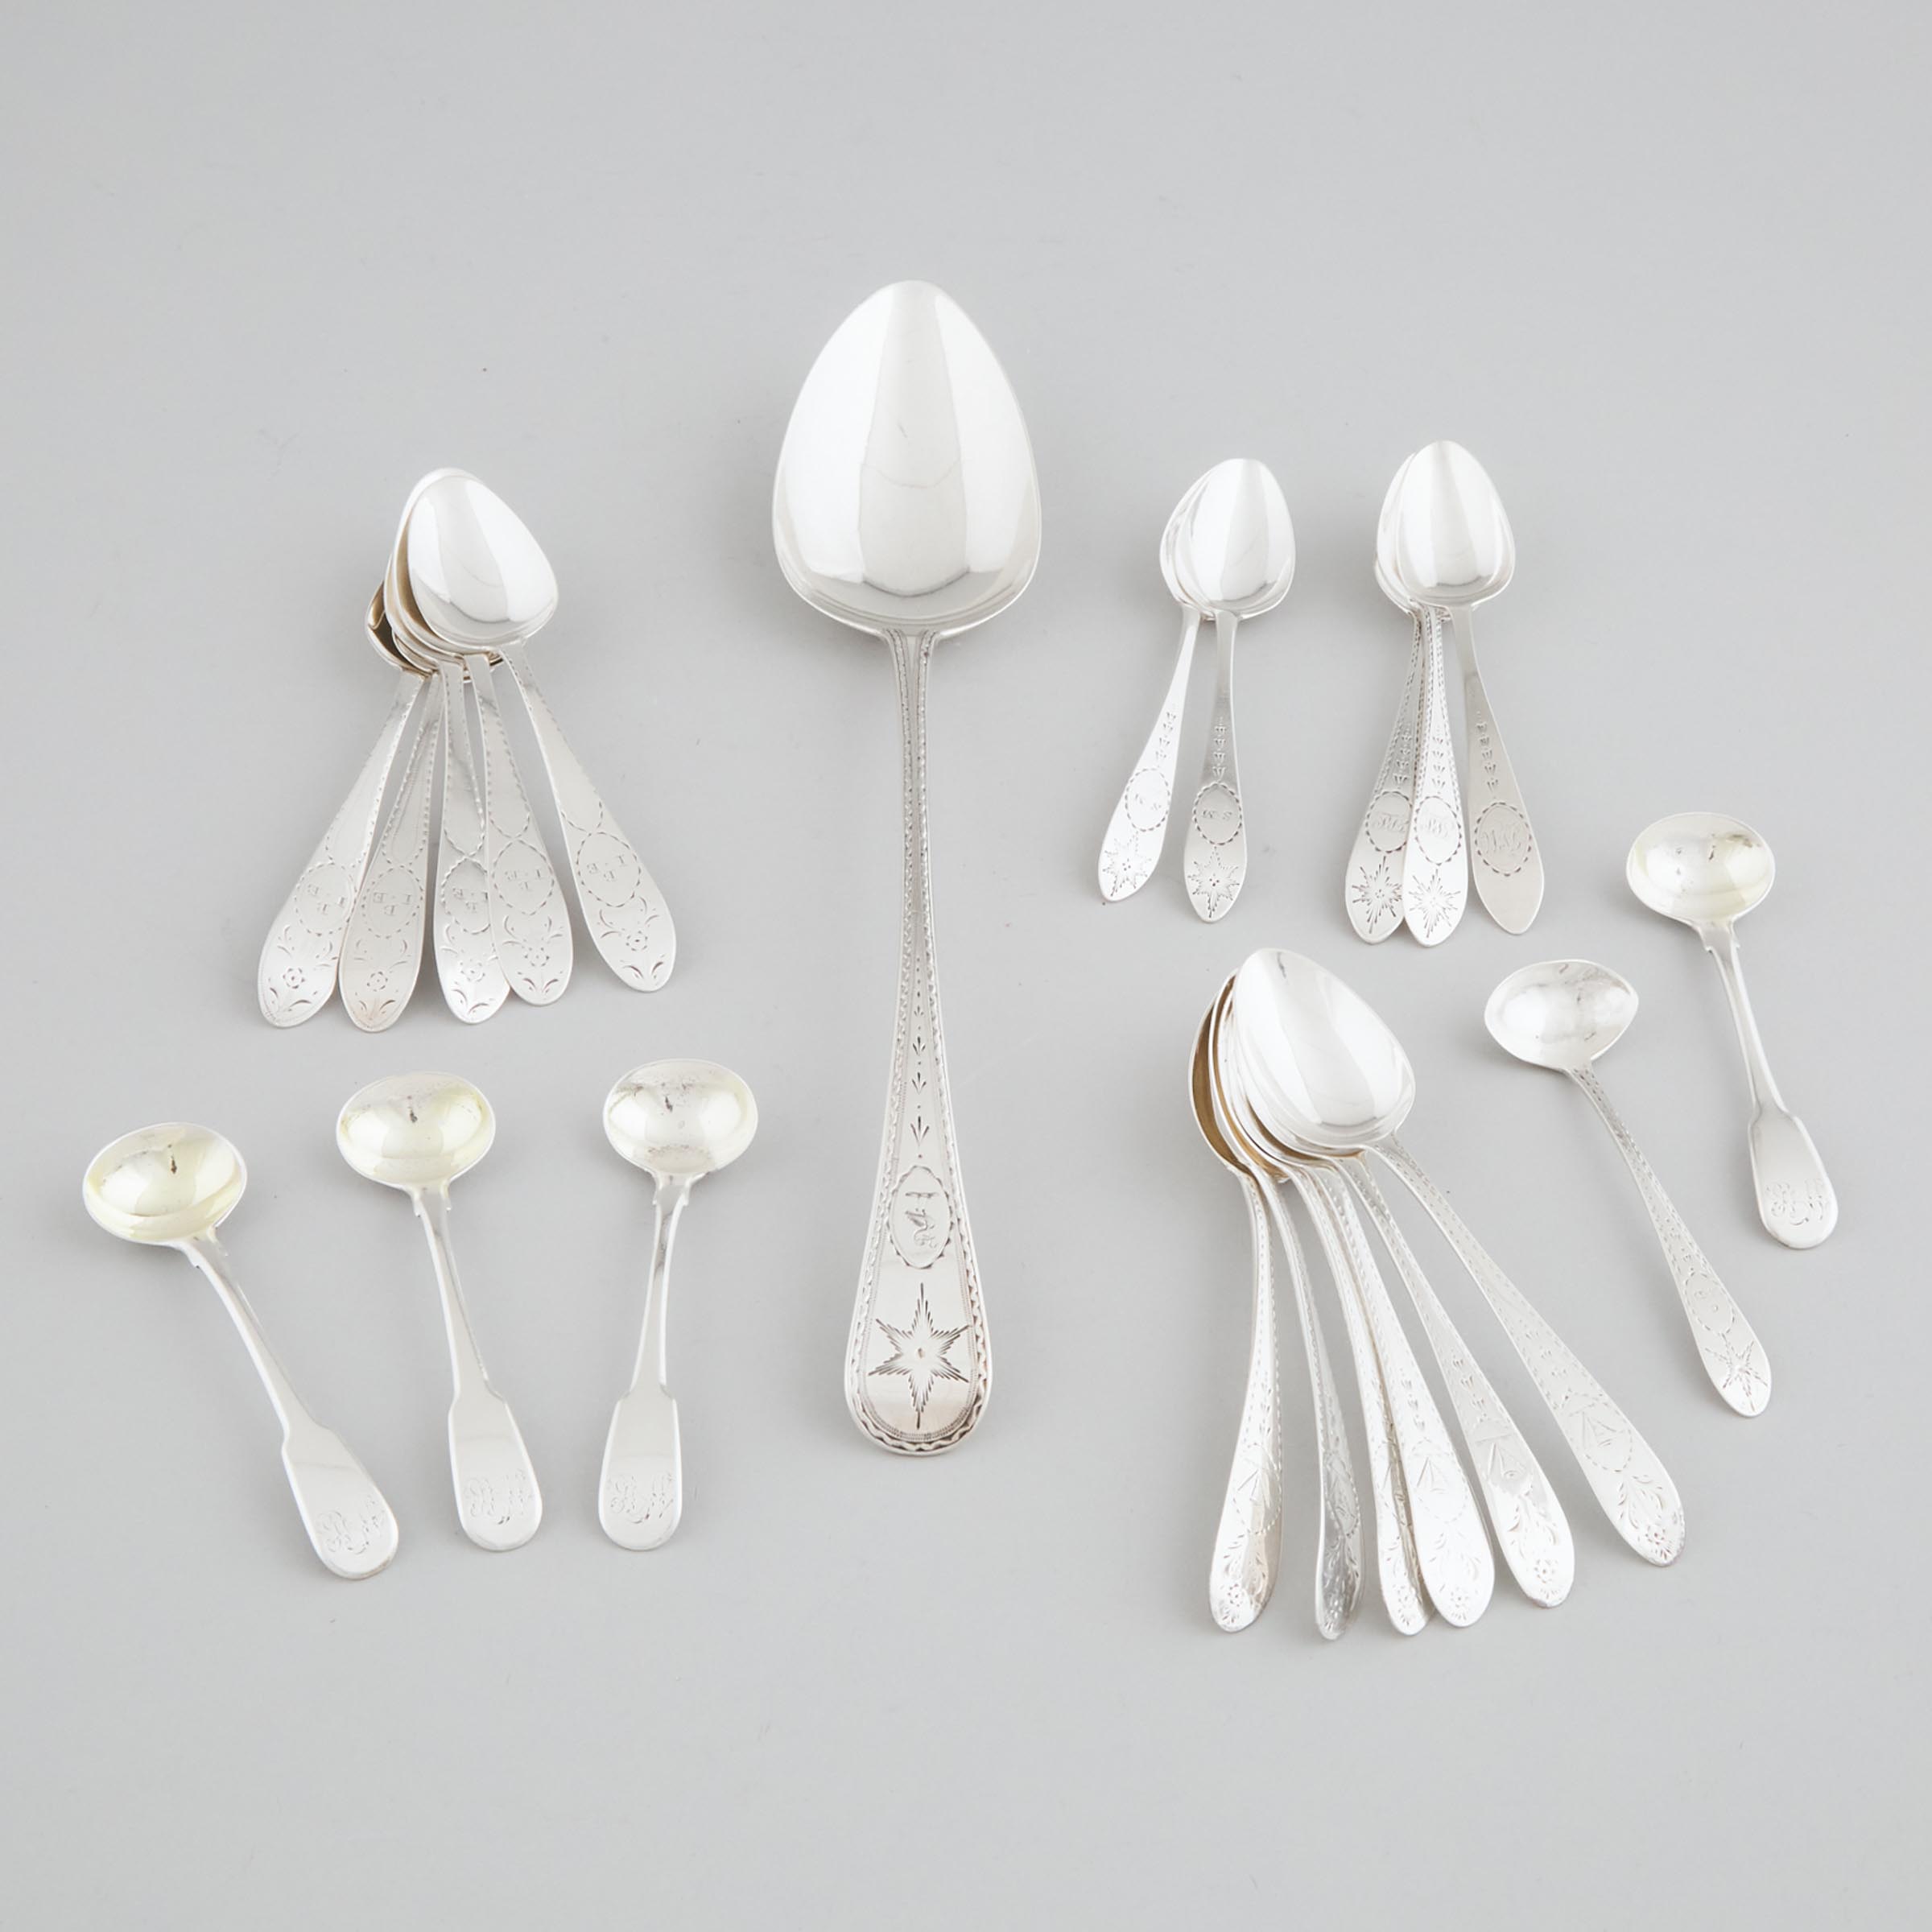 Group of George III Mainly Irish Silver Flatware, late 18th/early 19th century